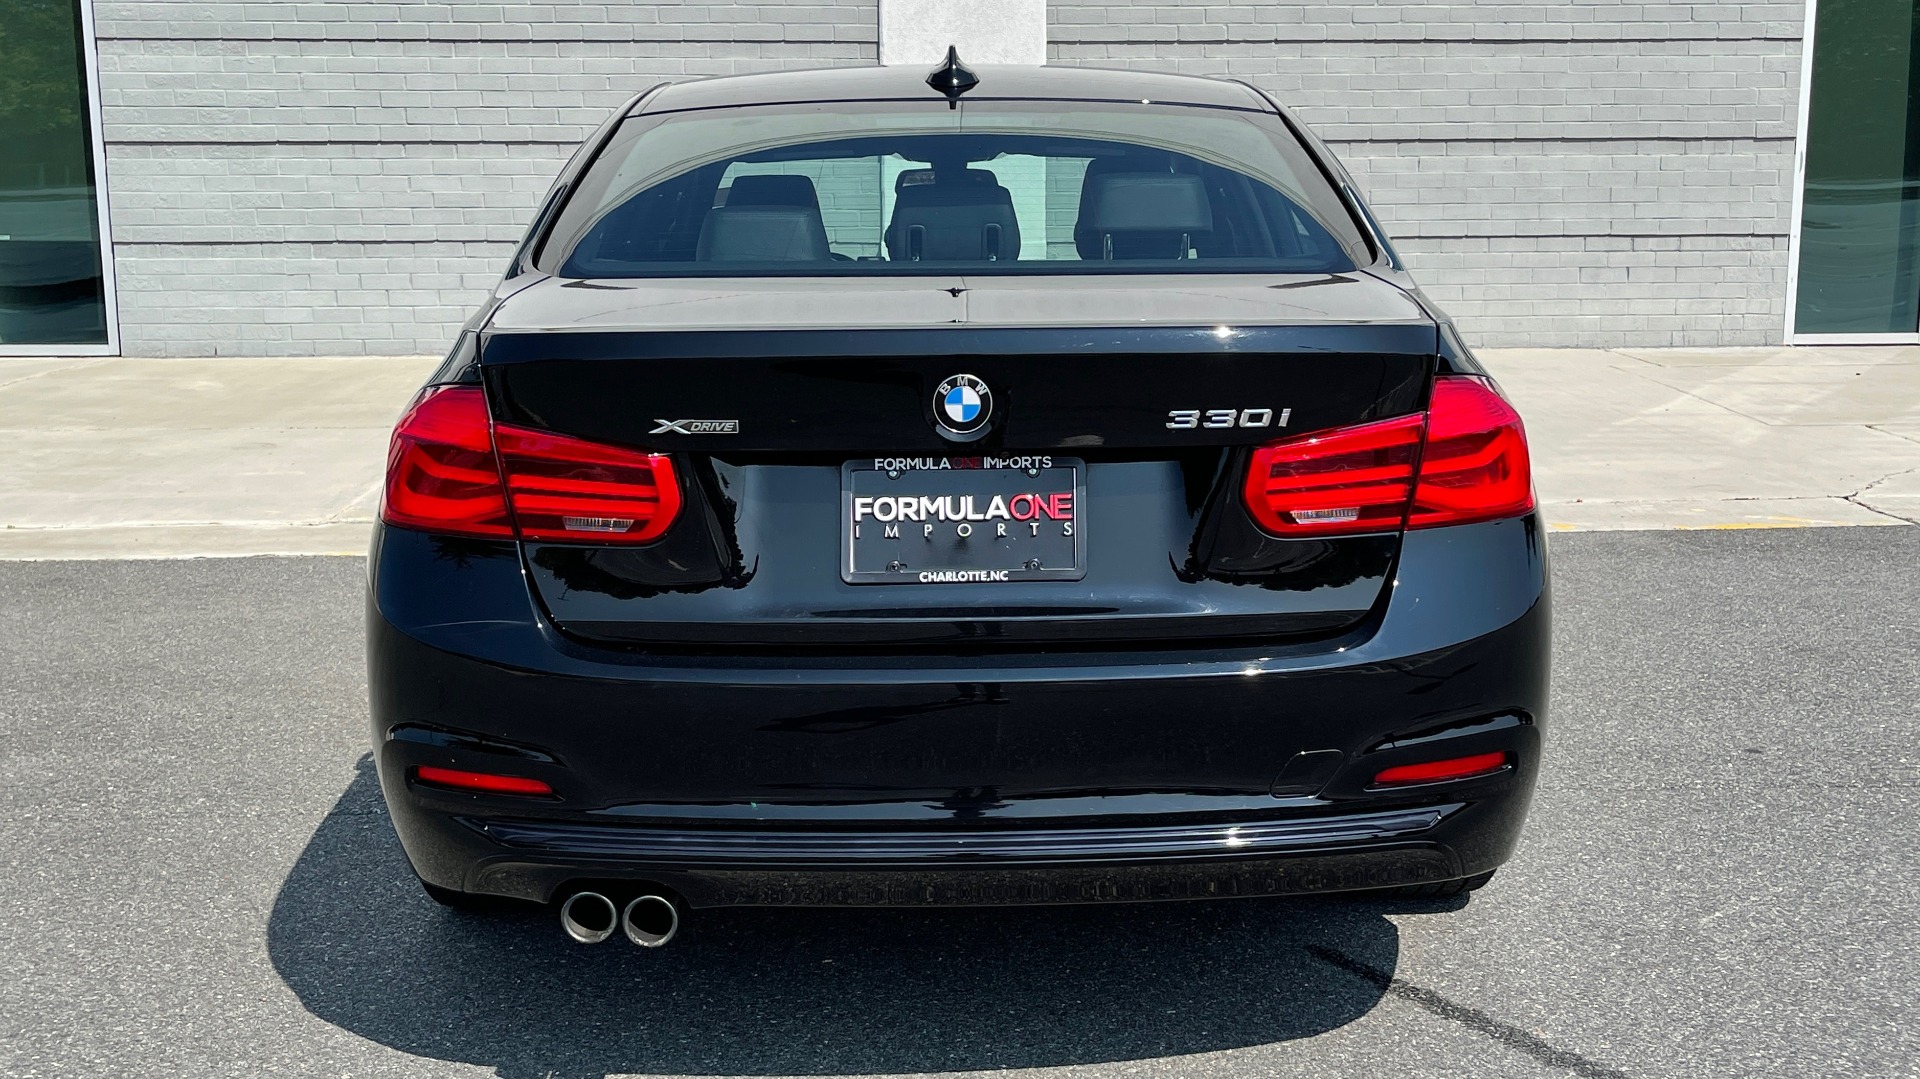 Used 2018 BMW 3 SERIES 330I XDRIVE / CONV PKG / SUNROOF / HTD STS / ABSD / REARVIEW for sale Sold at Formula Imports in Charlotte NC 28227 23